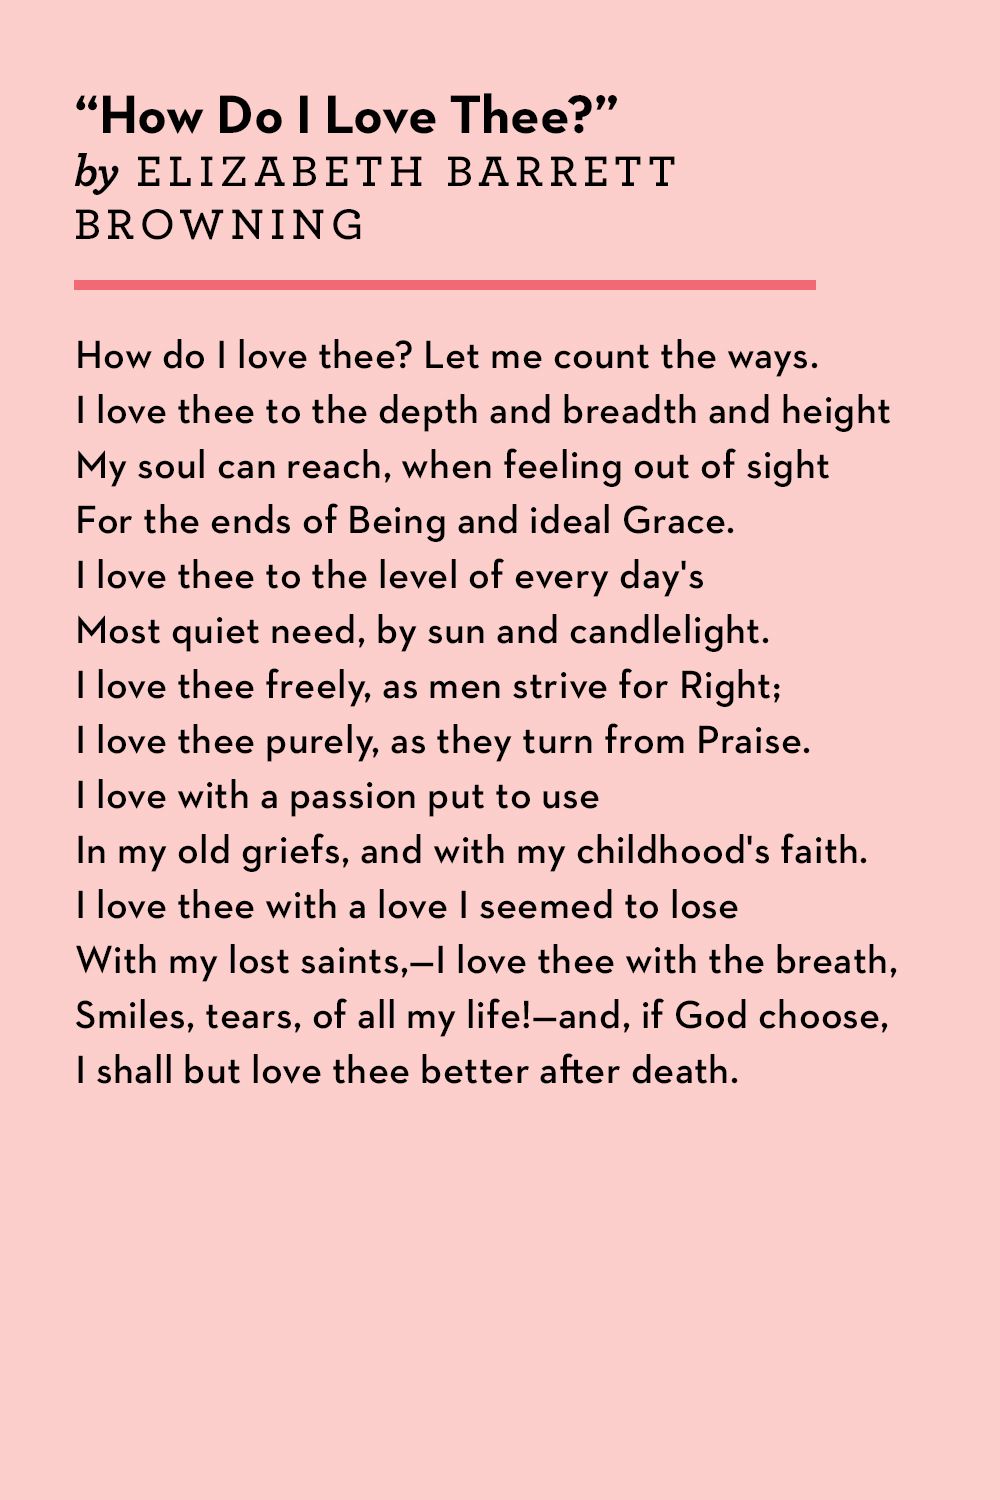 maya angelou poems about love